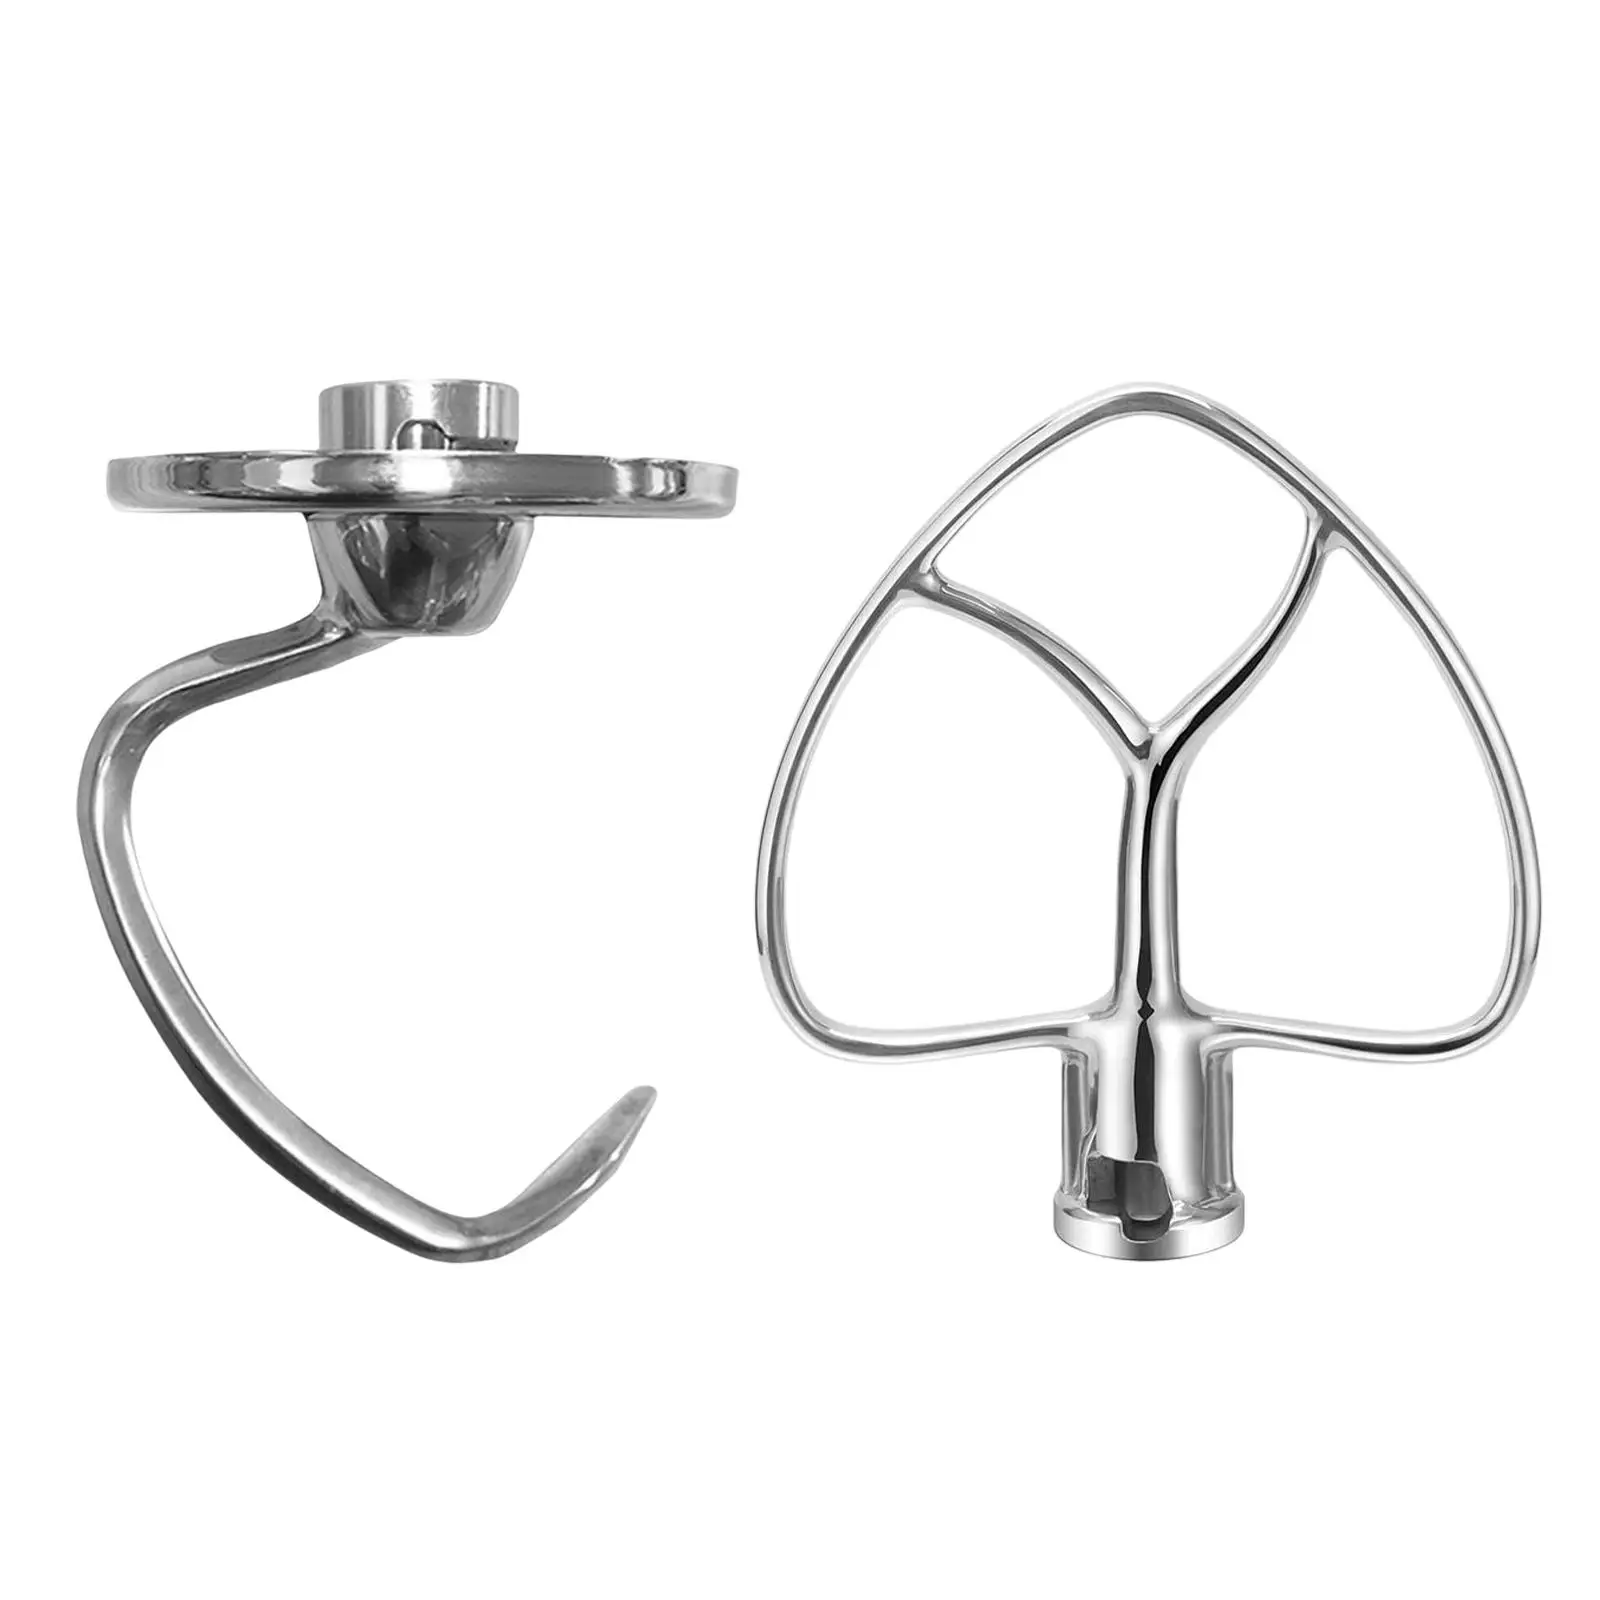 Stand Mixer Attachments Stir Safe Sturdy Lifting Type paste Hook Mixer Accessory for 4.5Qt Pastry Bread Pasta Baking